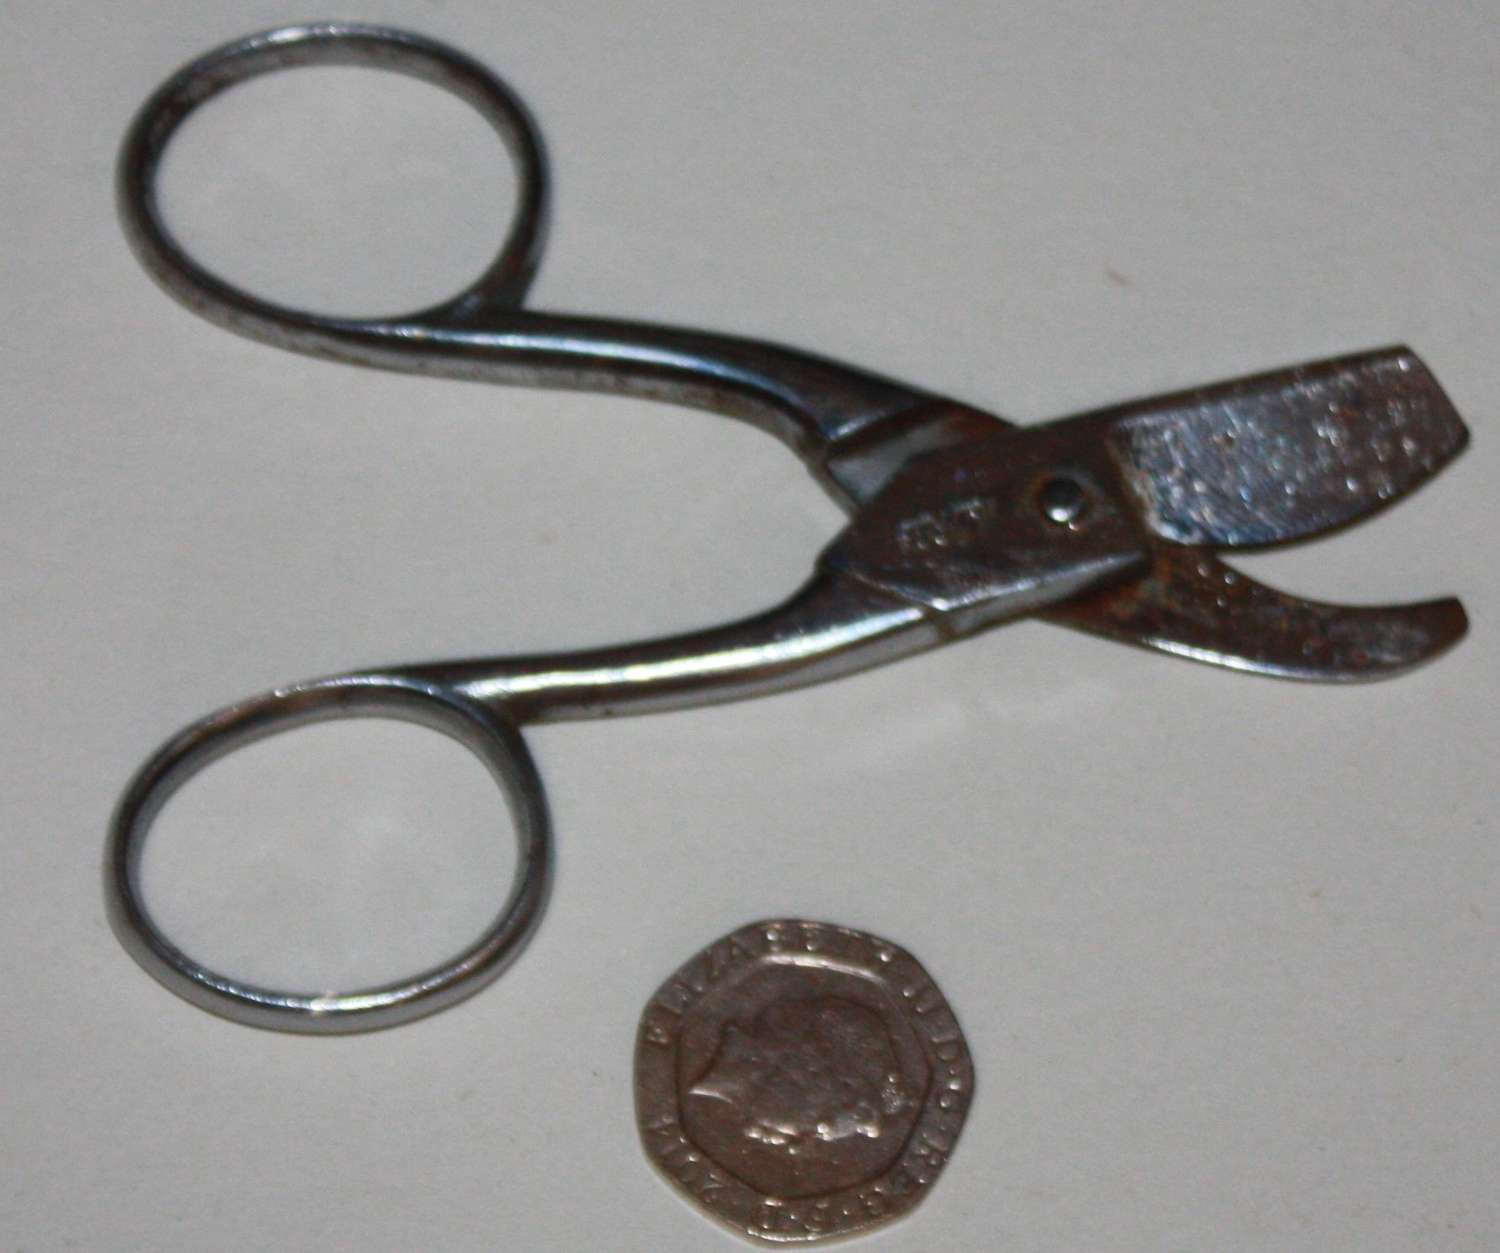 A GOOD USED RARE PAIR OF THE SMALL SIZE WAR GRADE MEDICAL SCISSORS